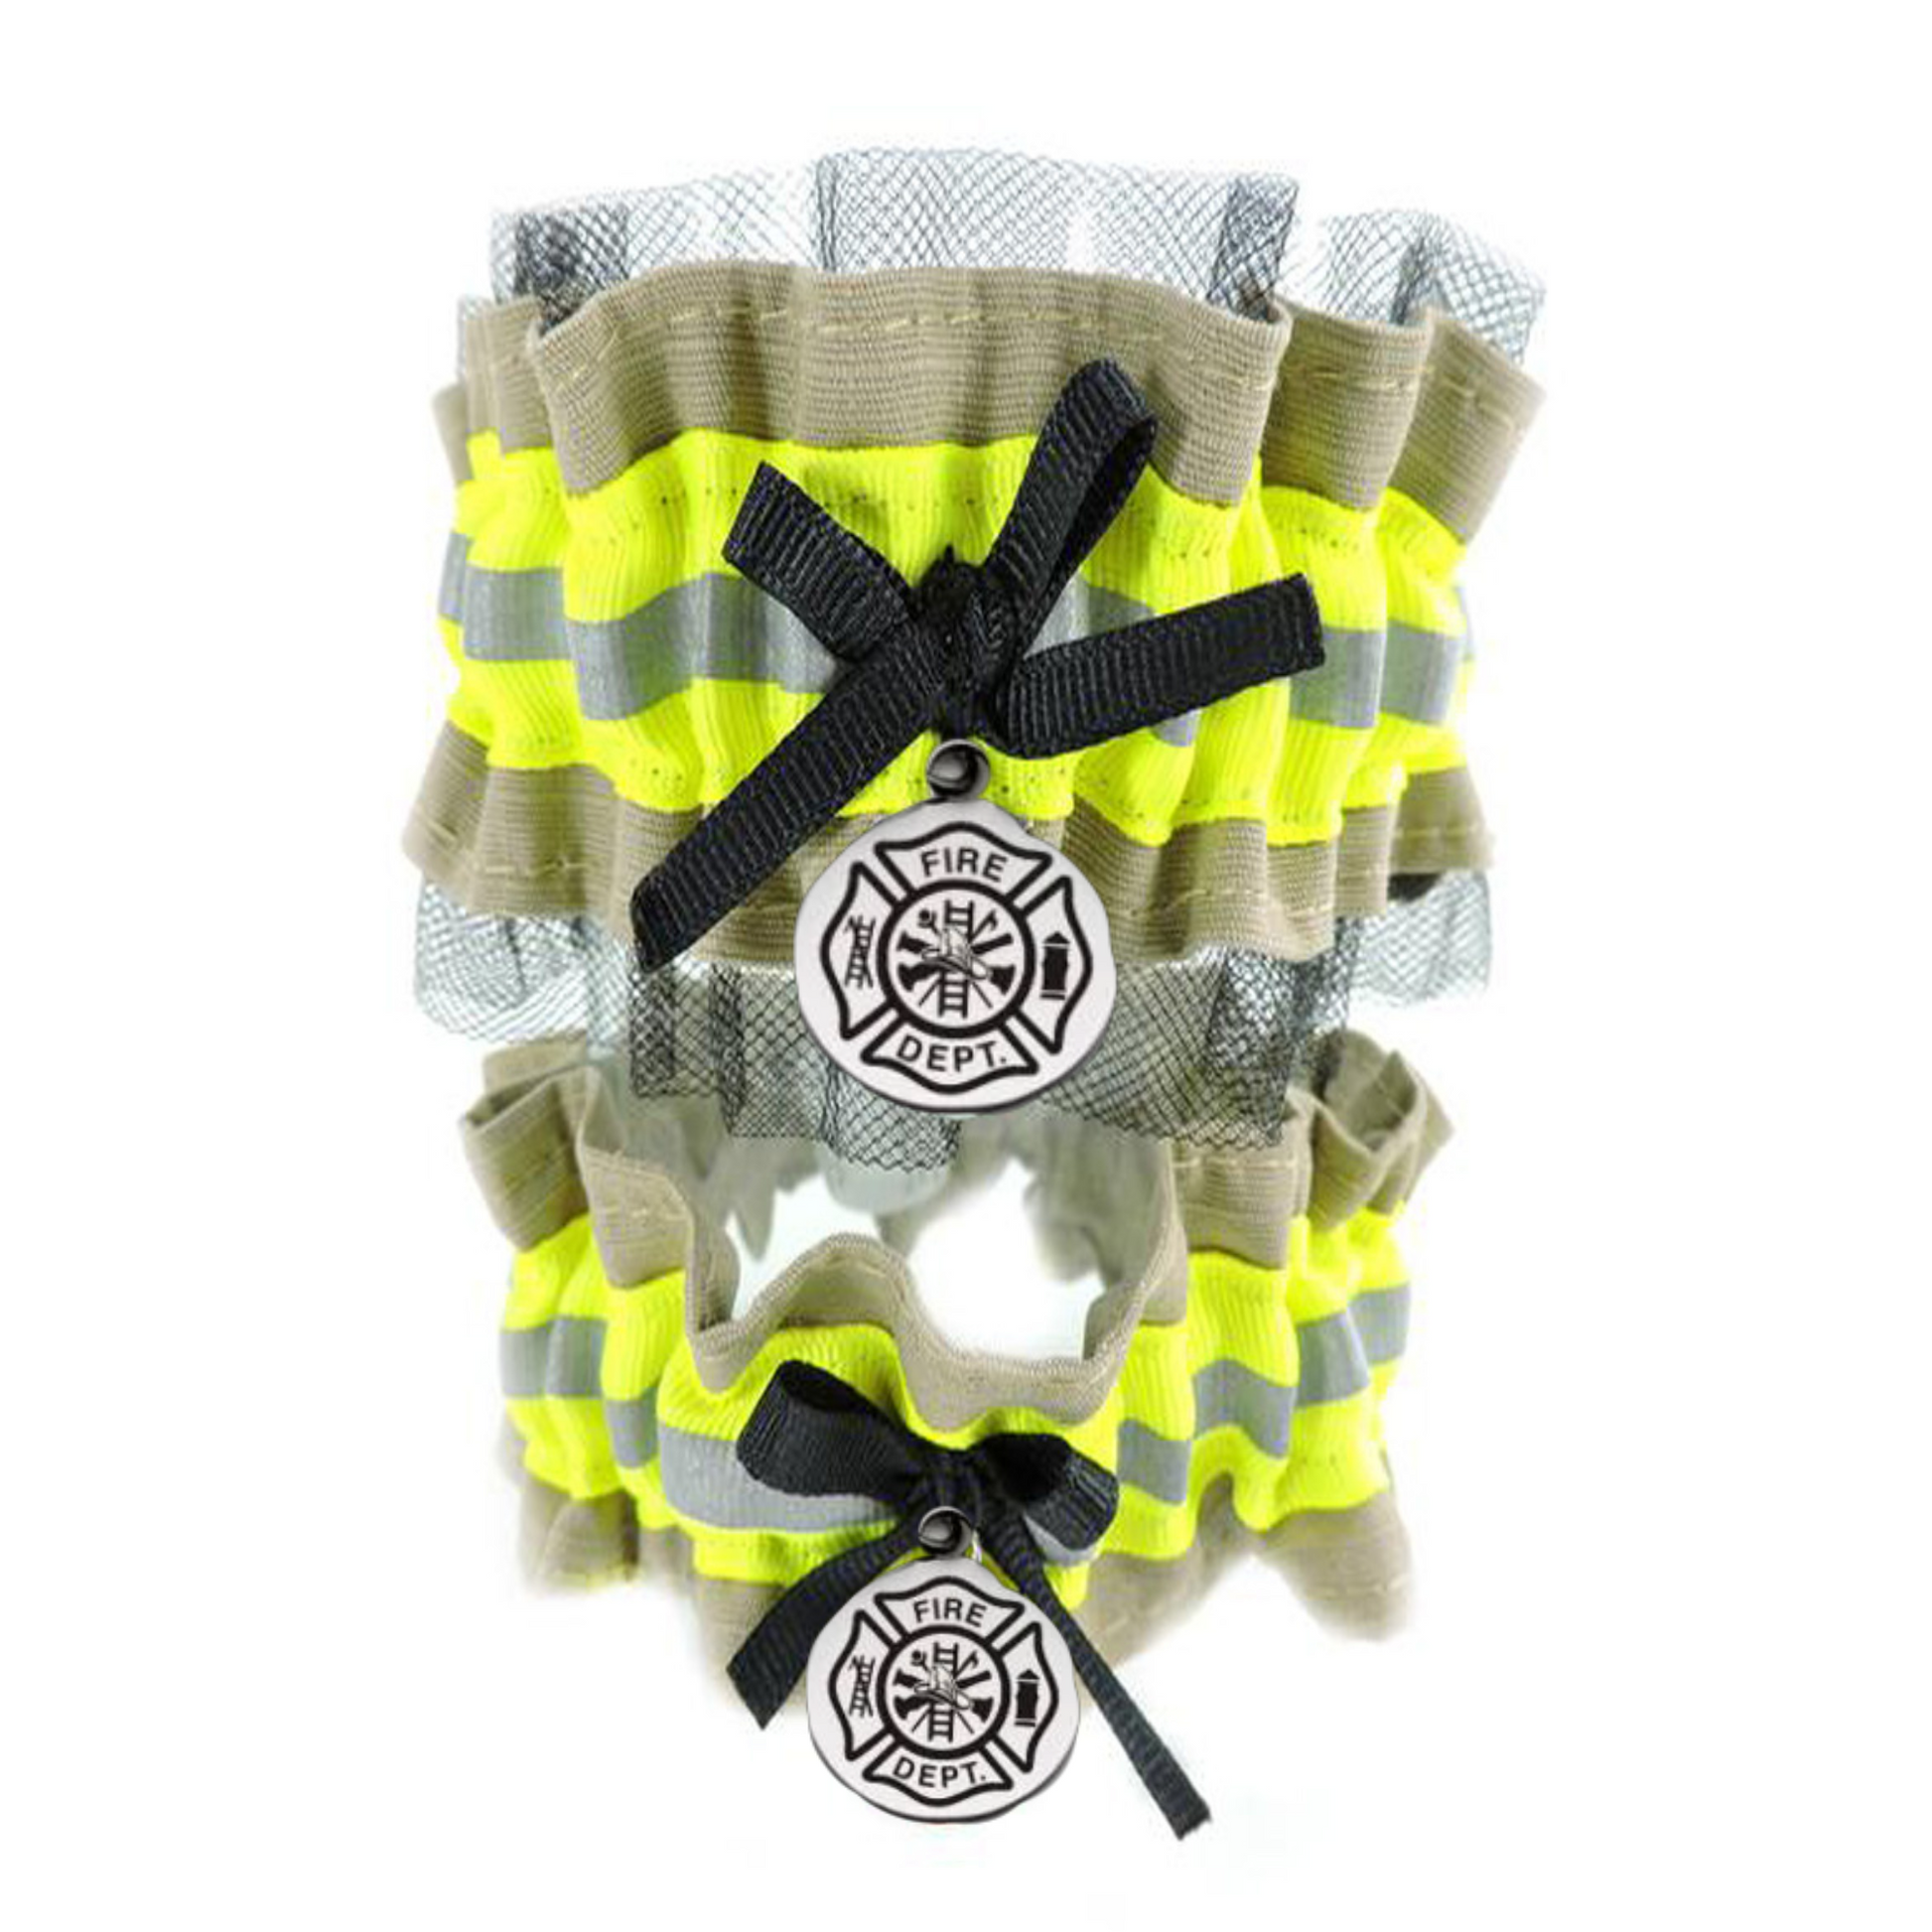 Firefighter wedding garter set, one with black tulle, toss garter without tulle tan fabric and neon yellow reflective tape